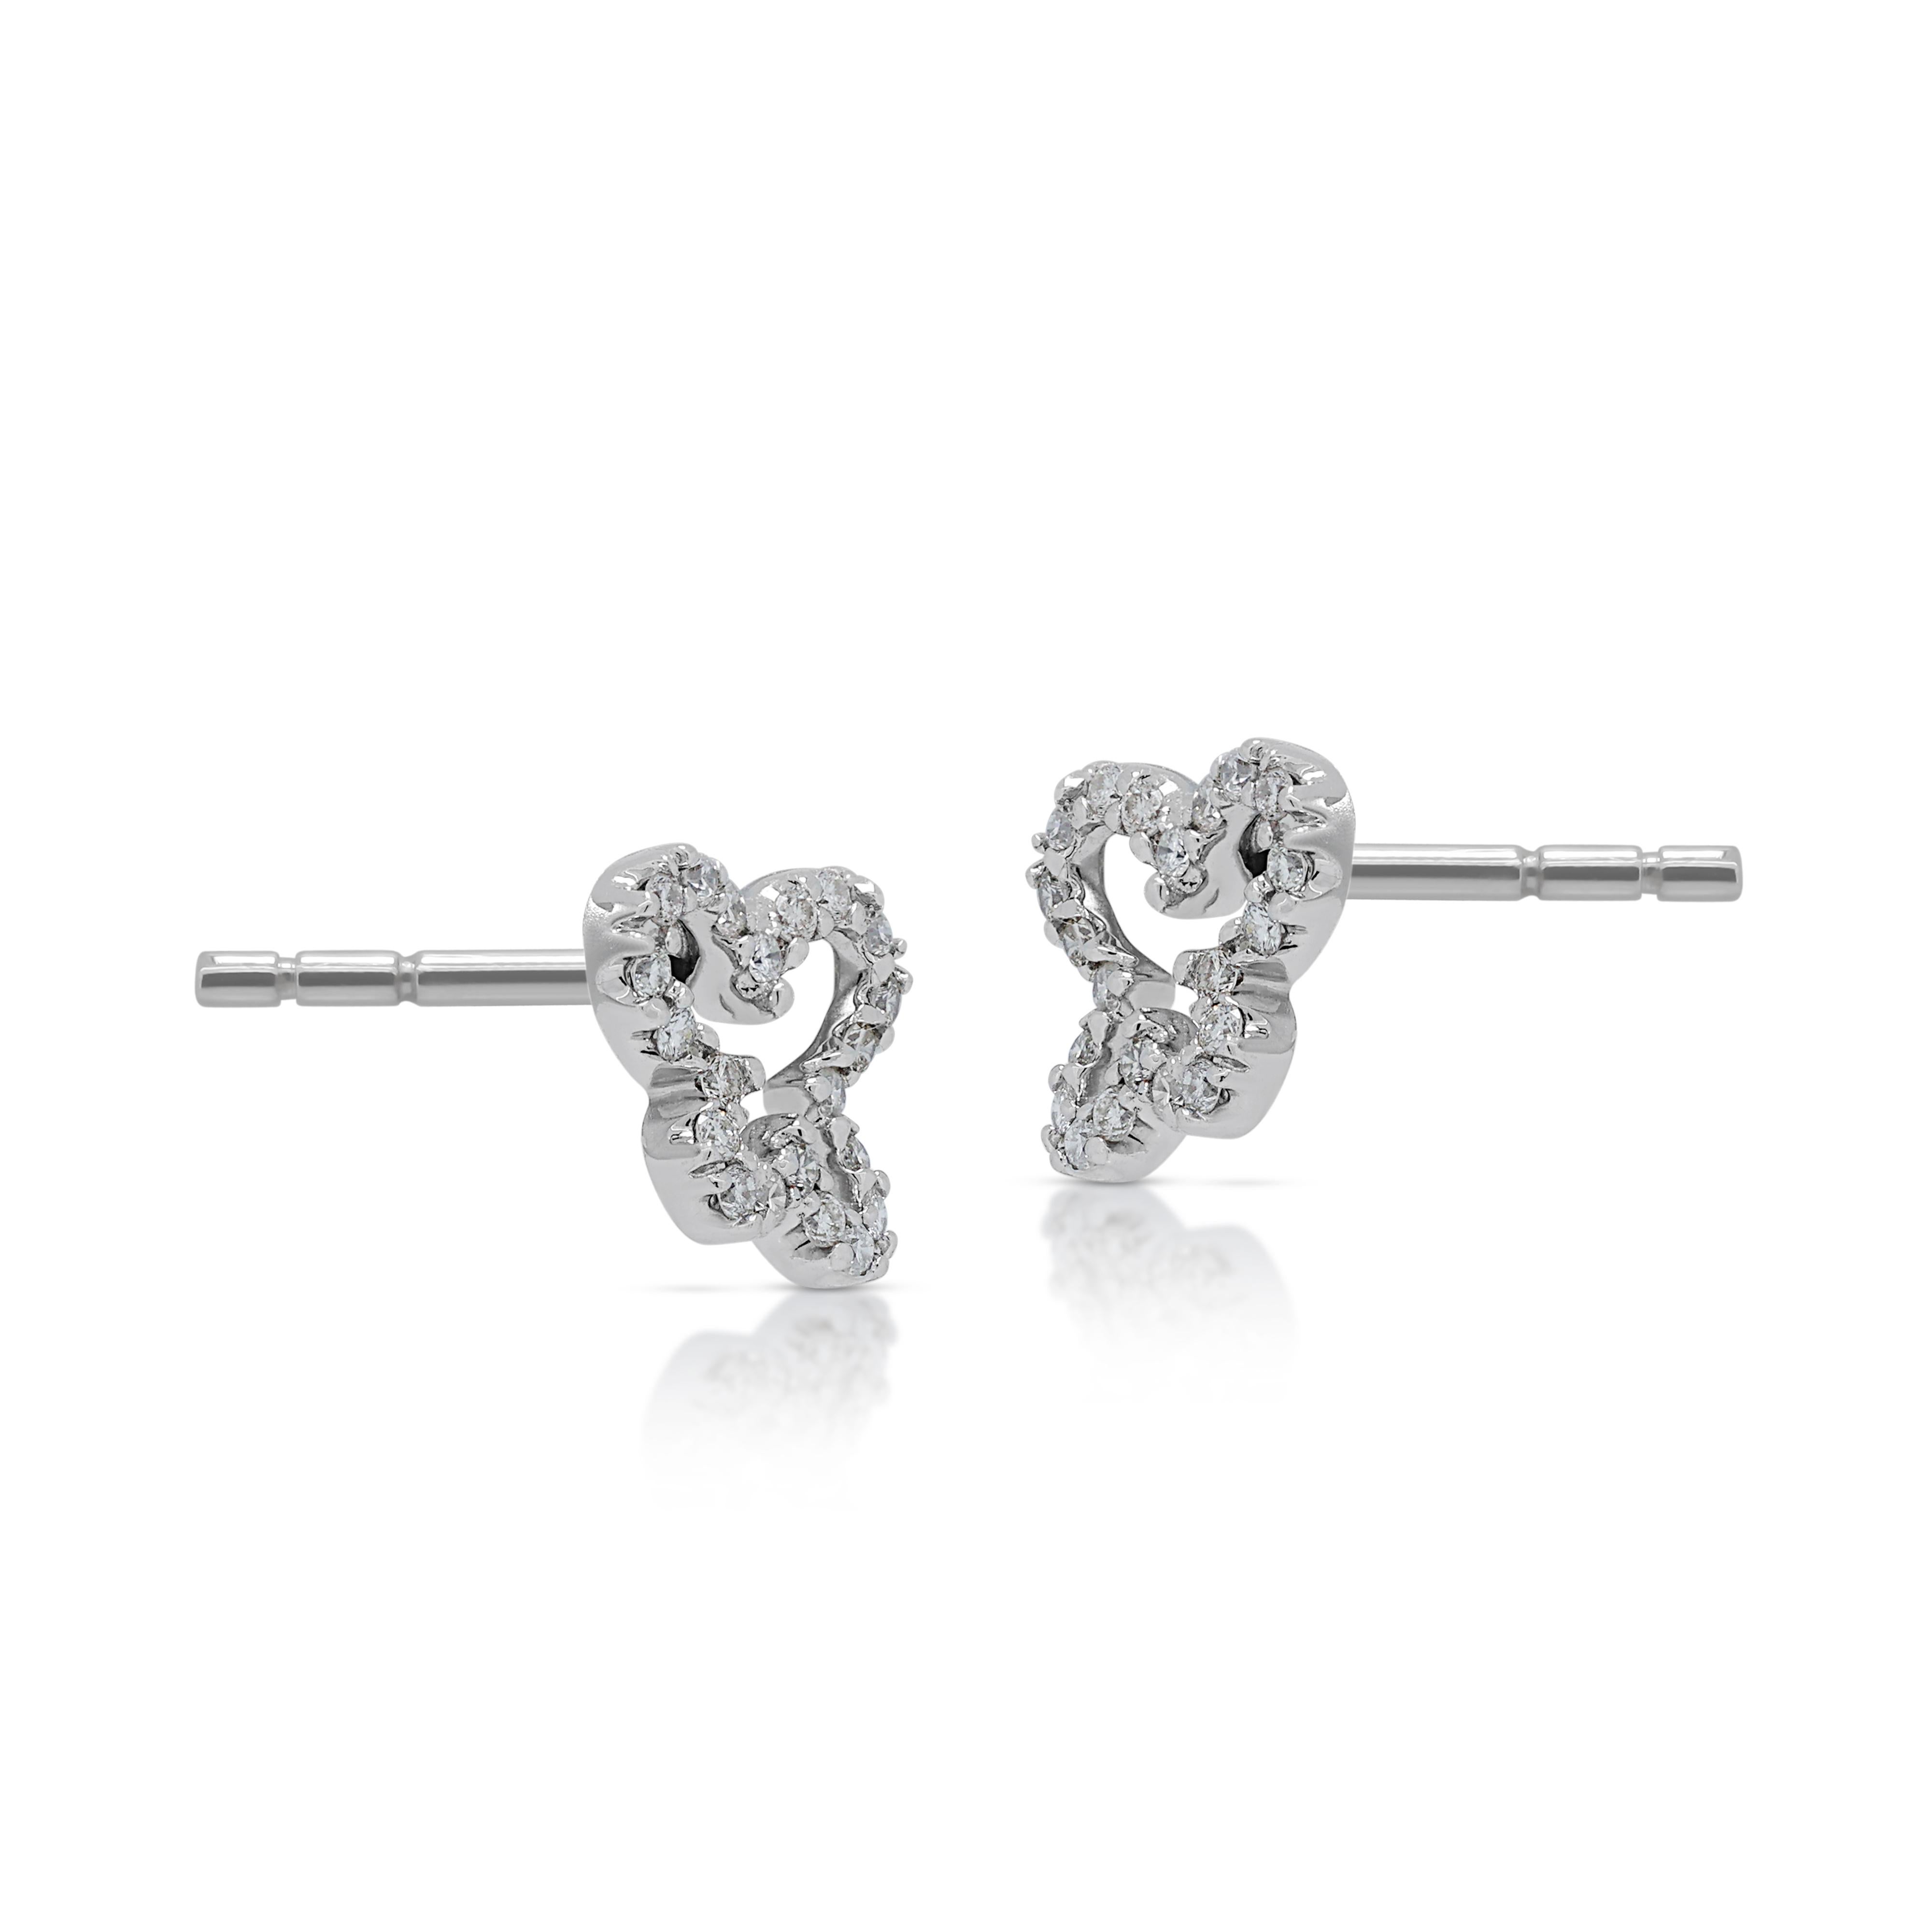 Stunning 0.29ct Diamonds Stud Earrings in 18K White Gold In Excellent Condition For Sale In רמת גן, IL